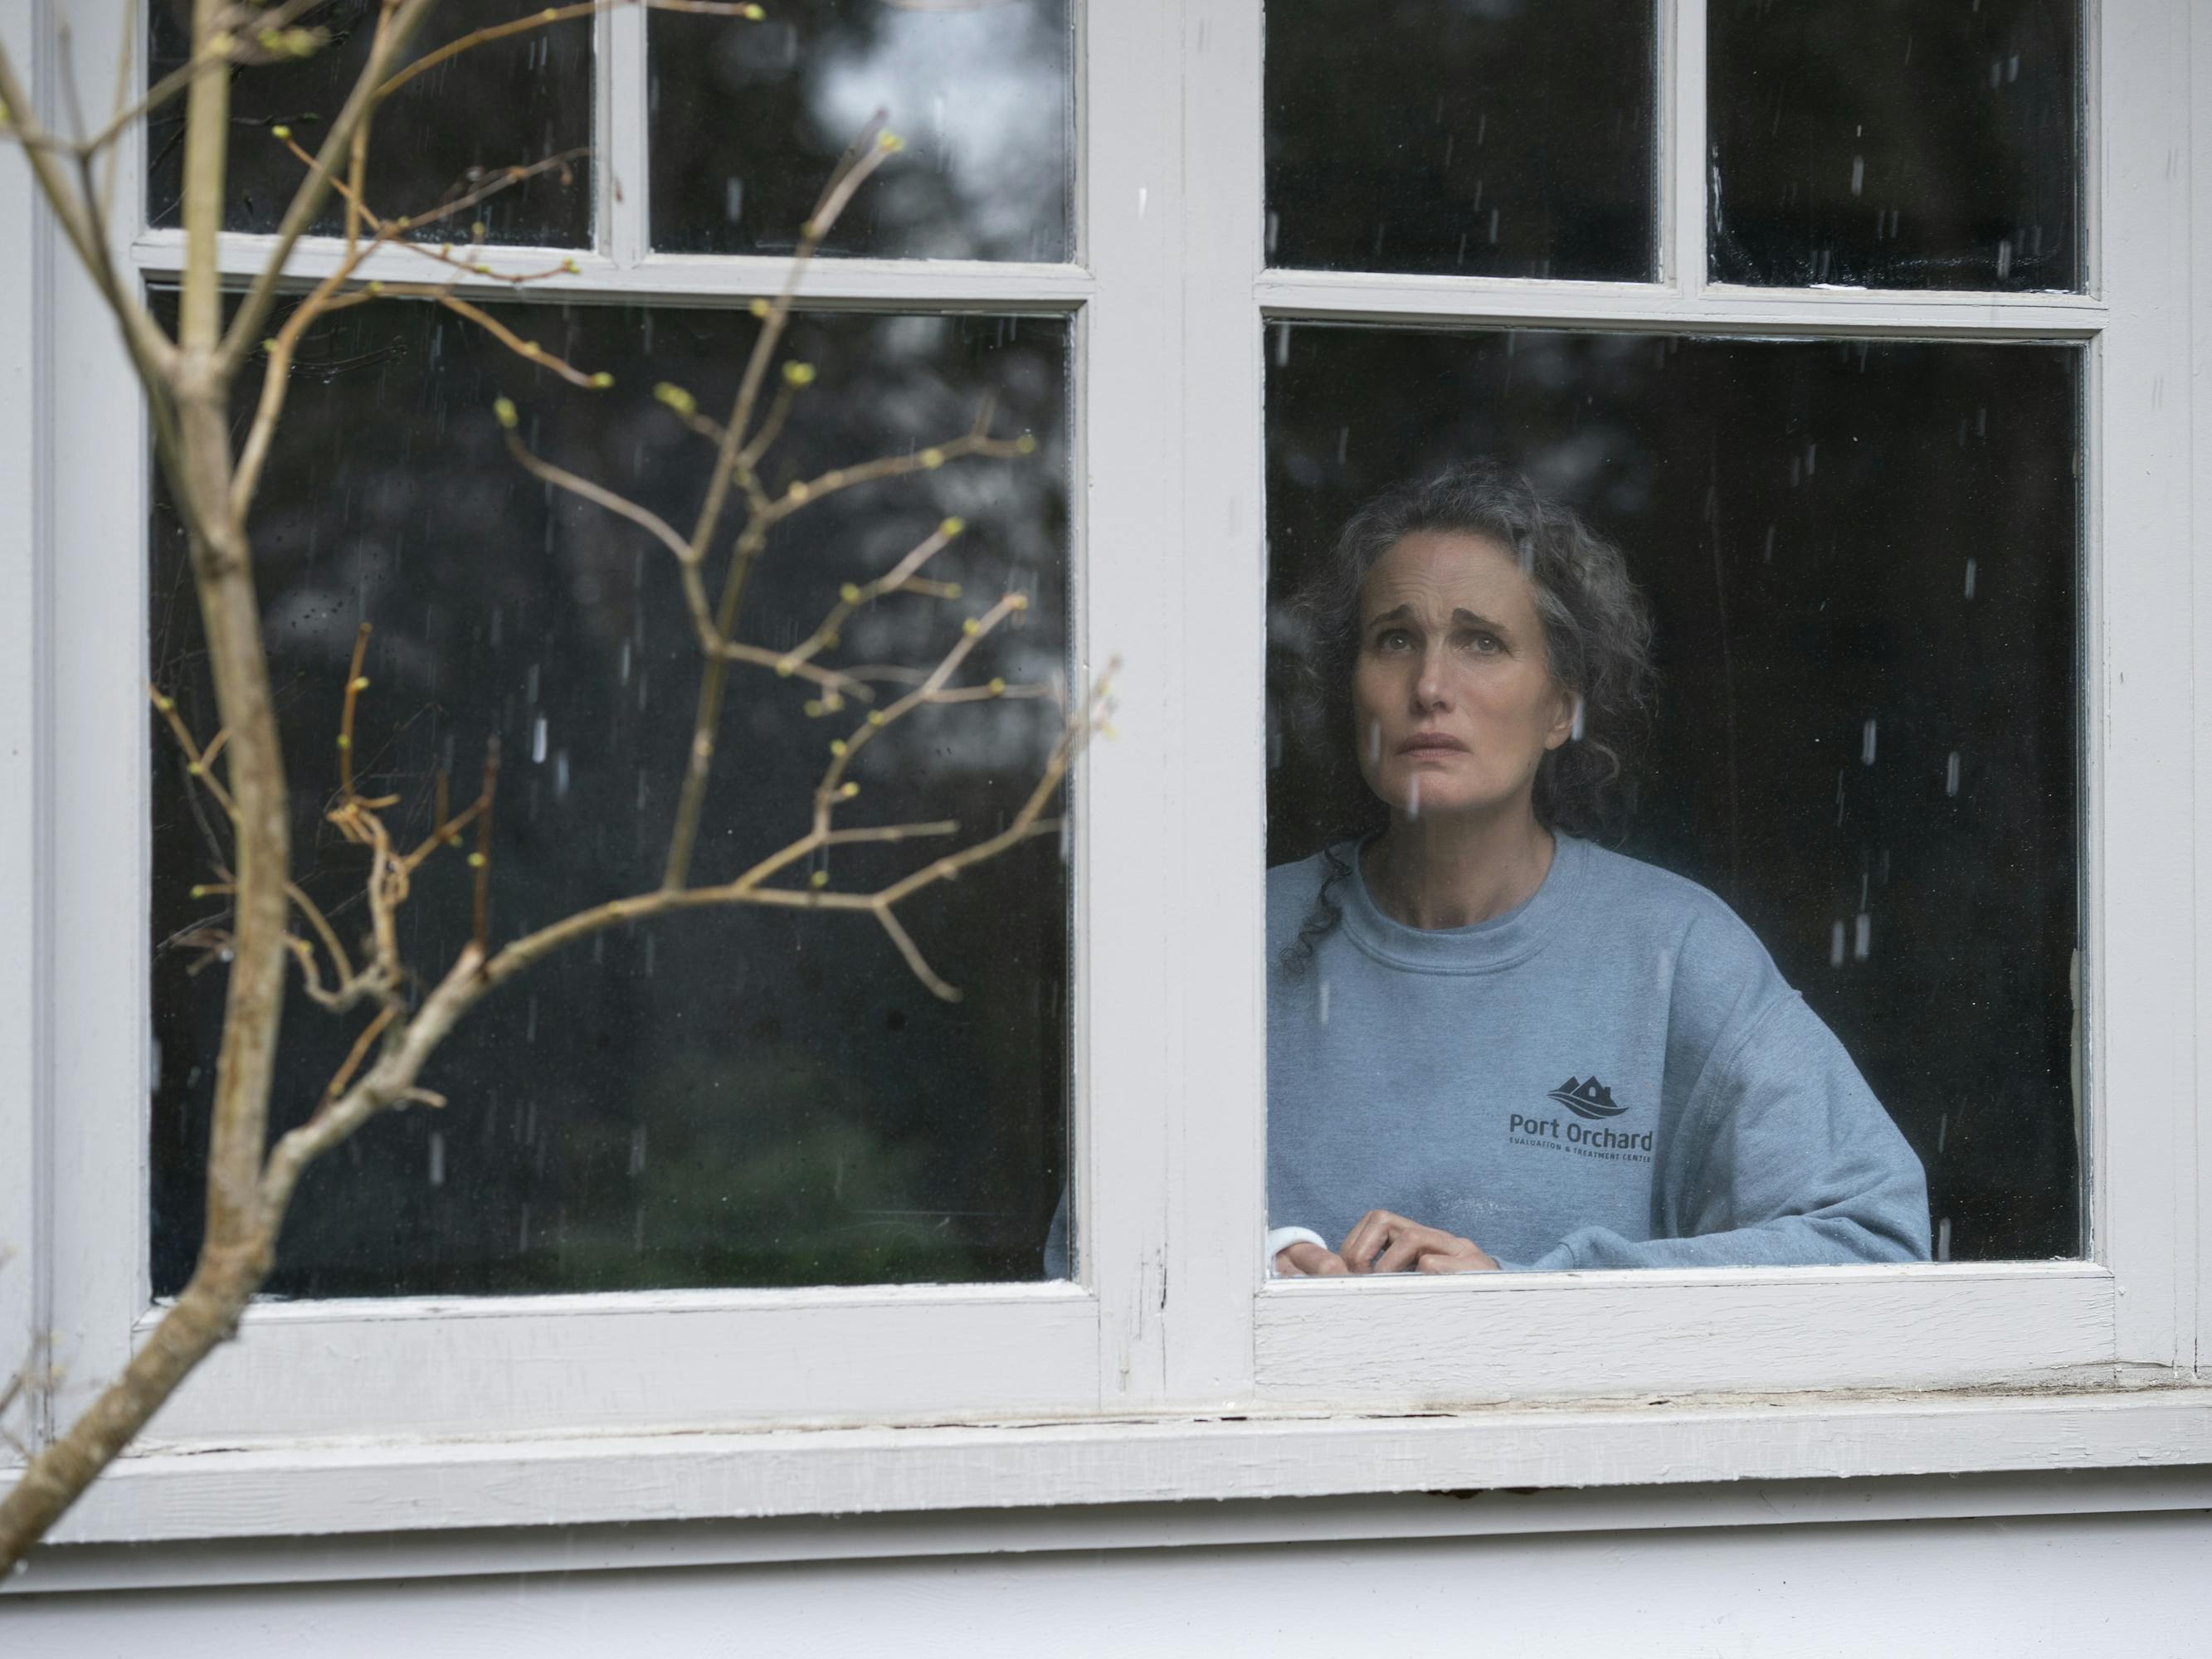 Andie MacDowell in Maid wears a grey sweatshirt and looks out the window.